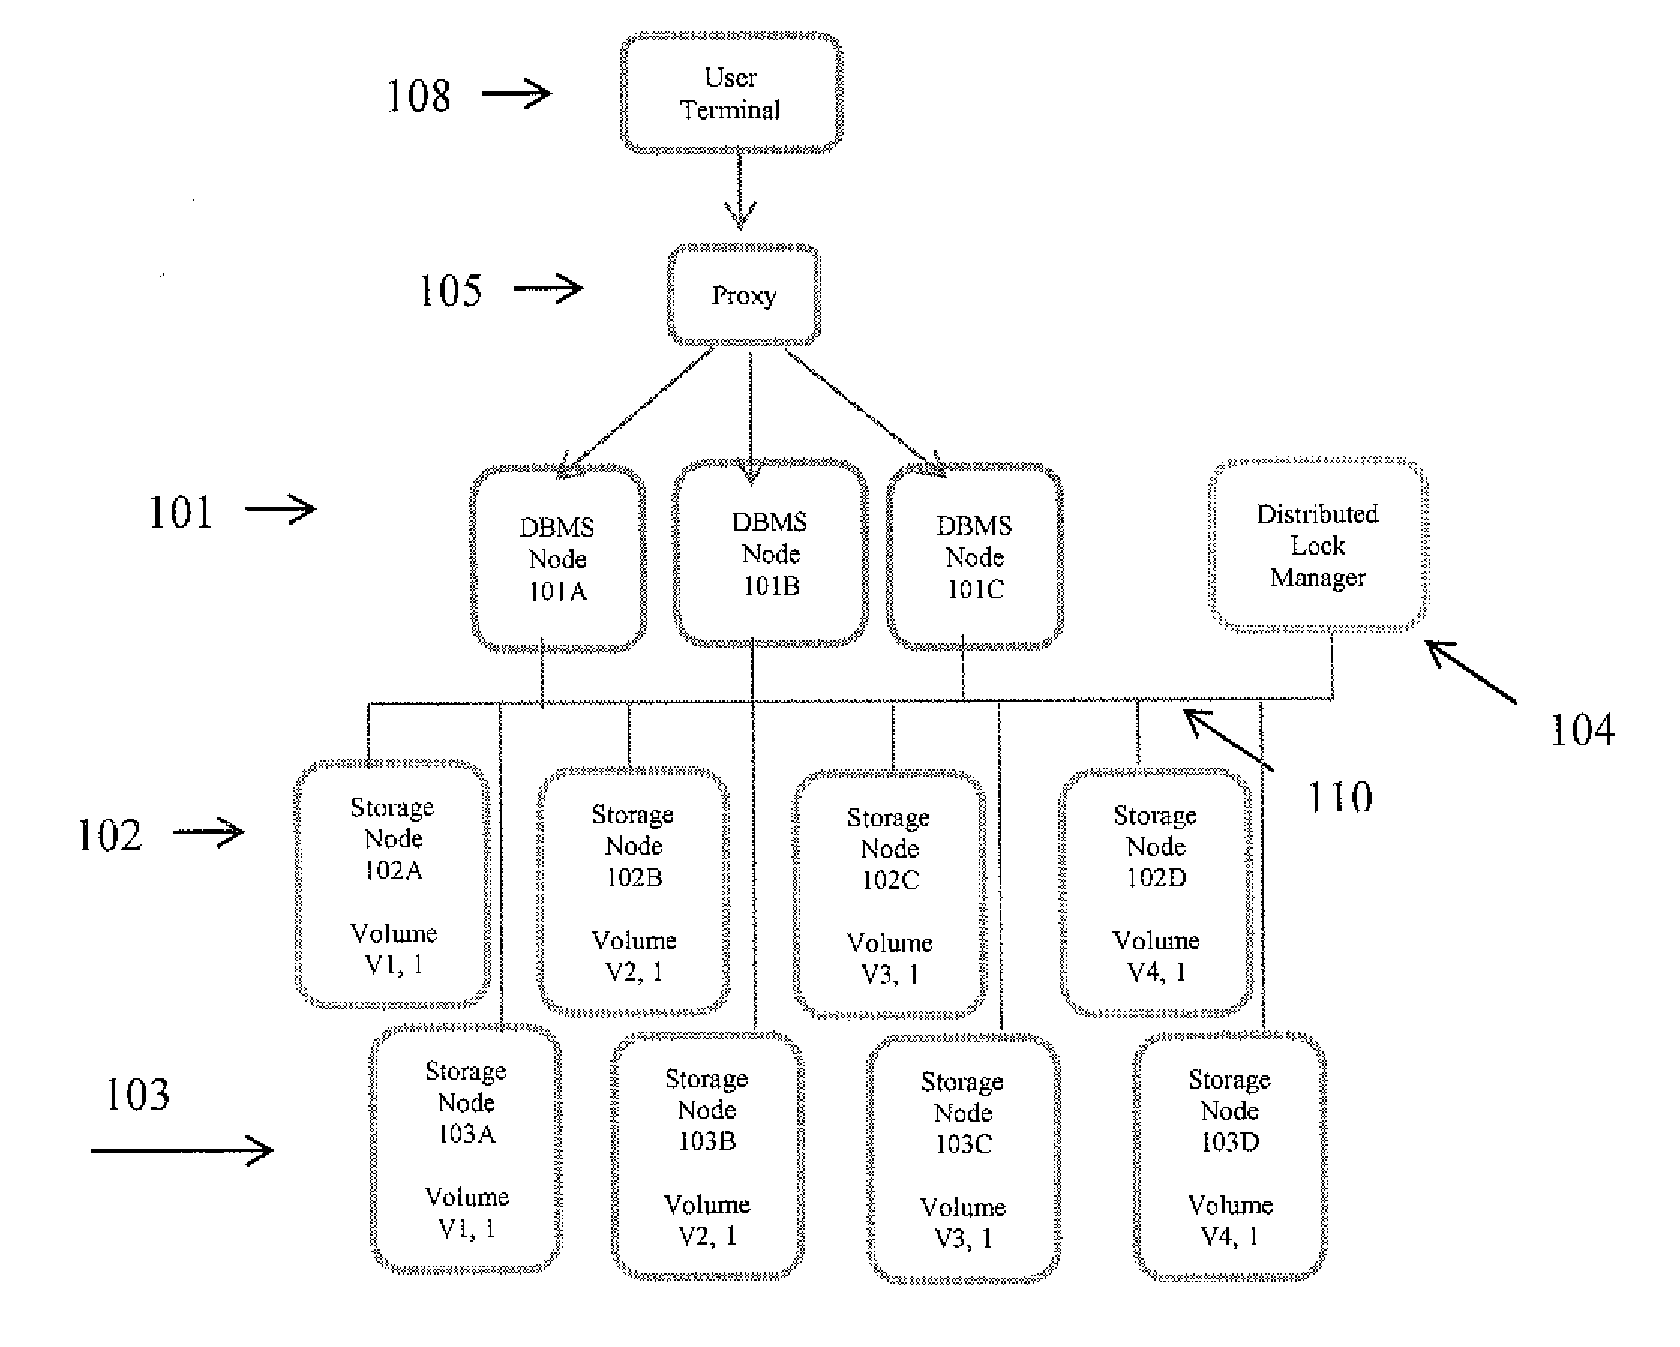 System and method for improving a query response rate by managing a column-based store in a row-based database